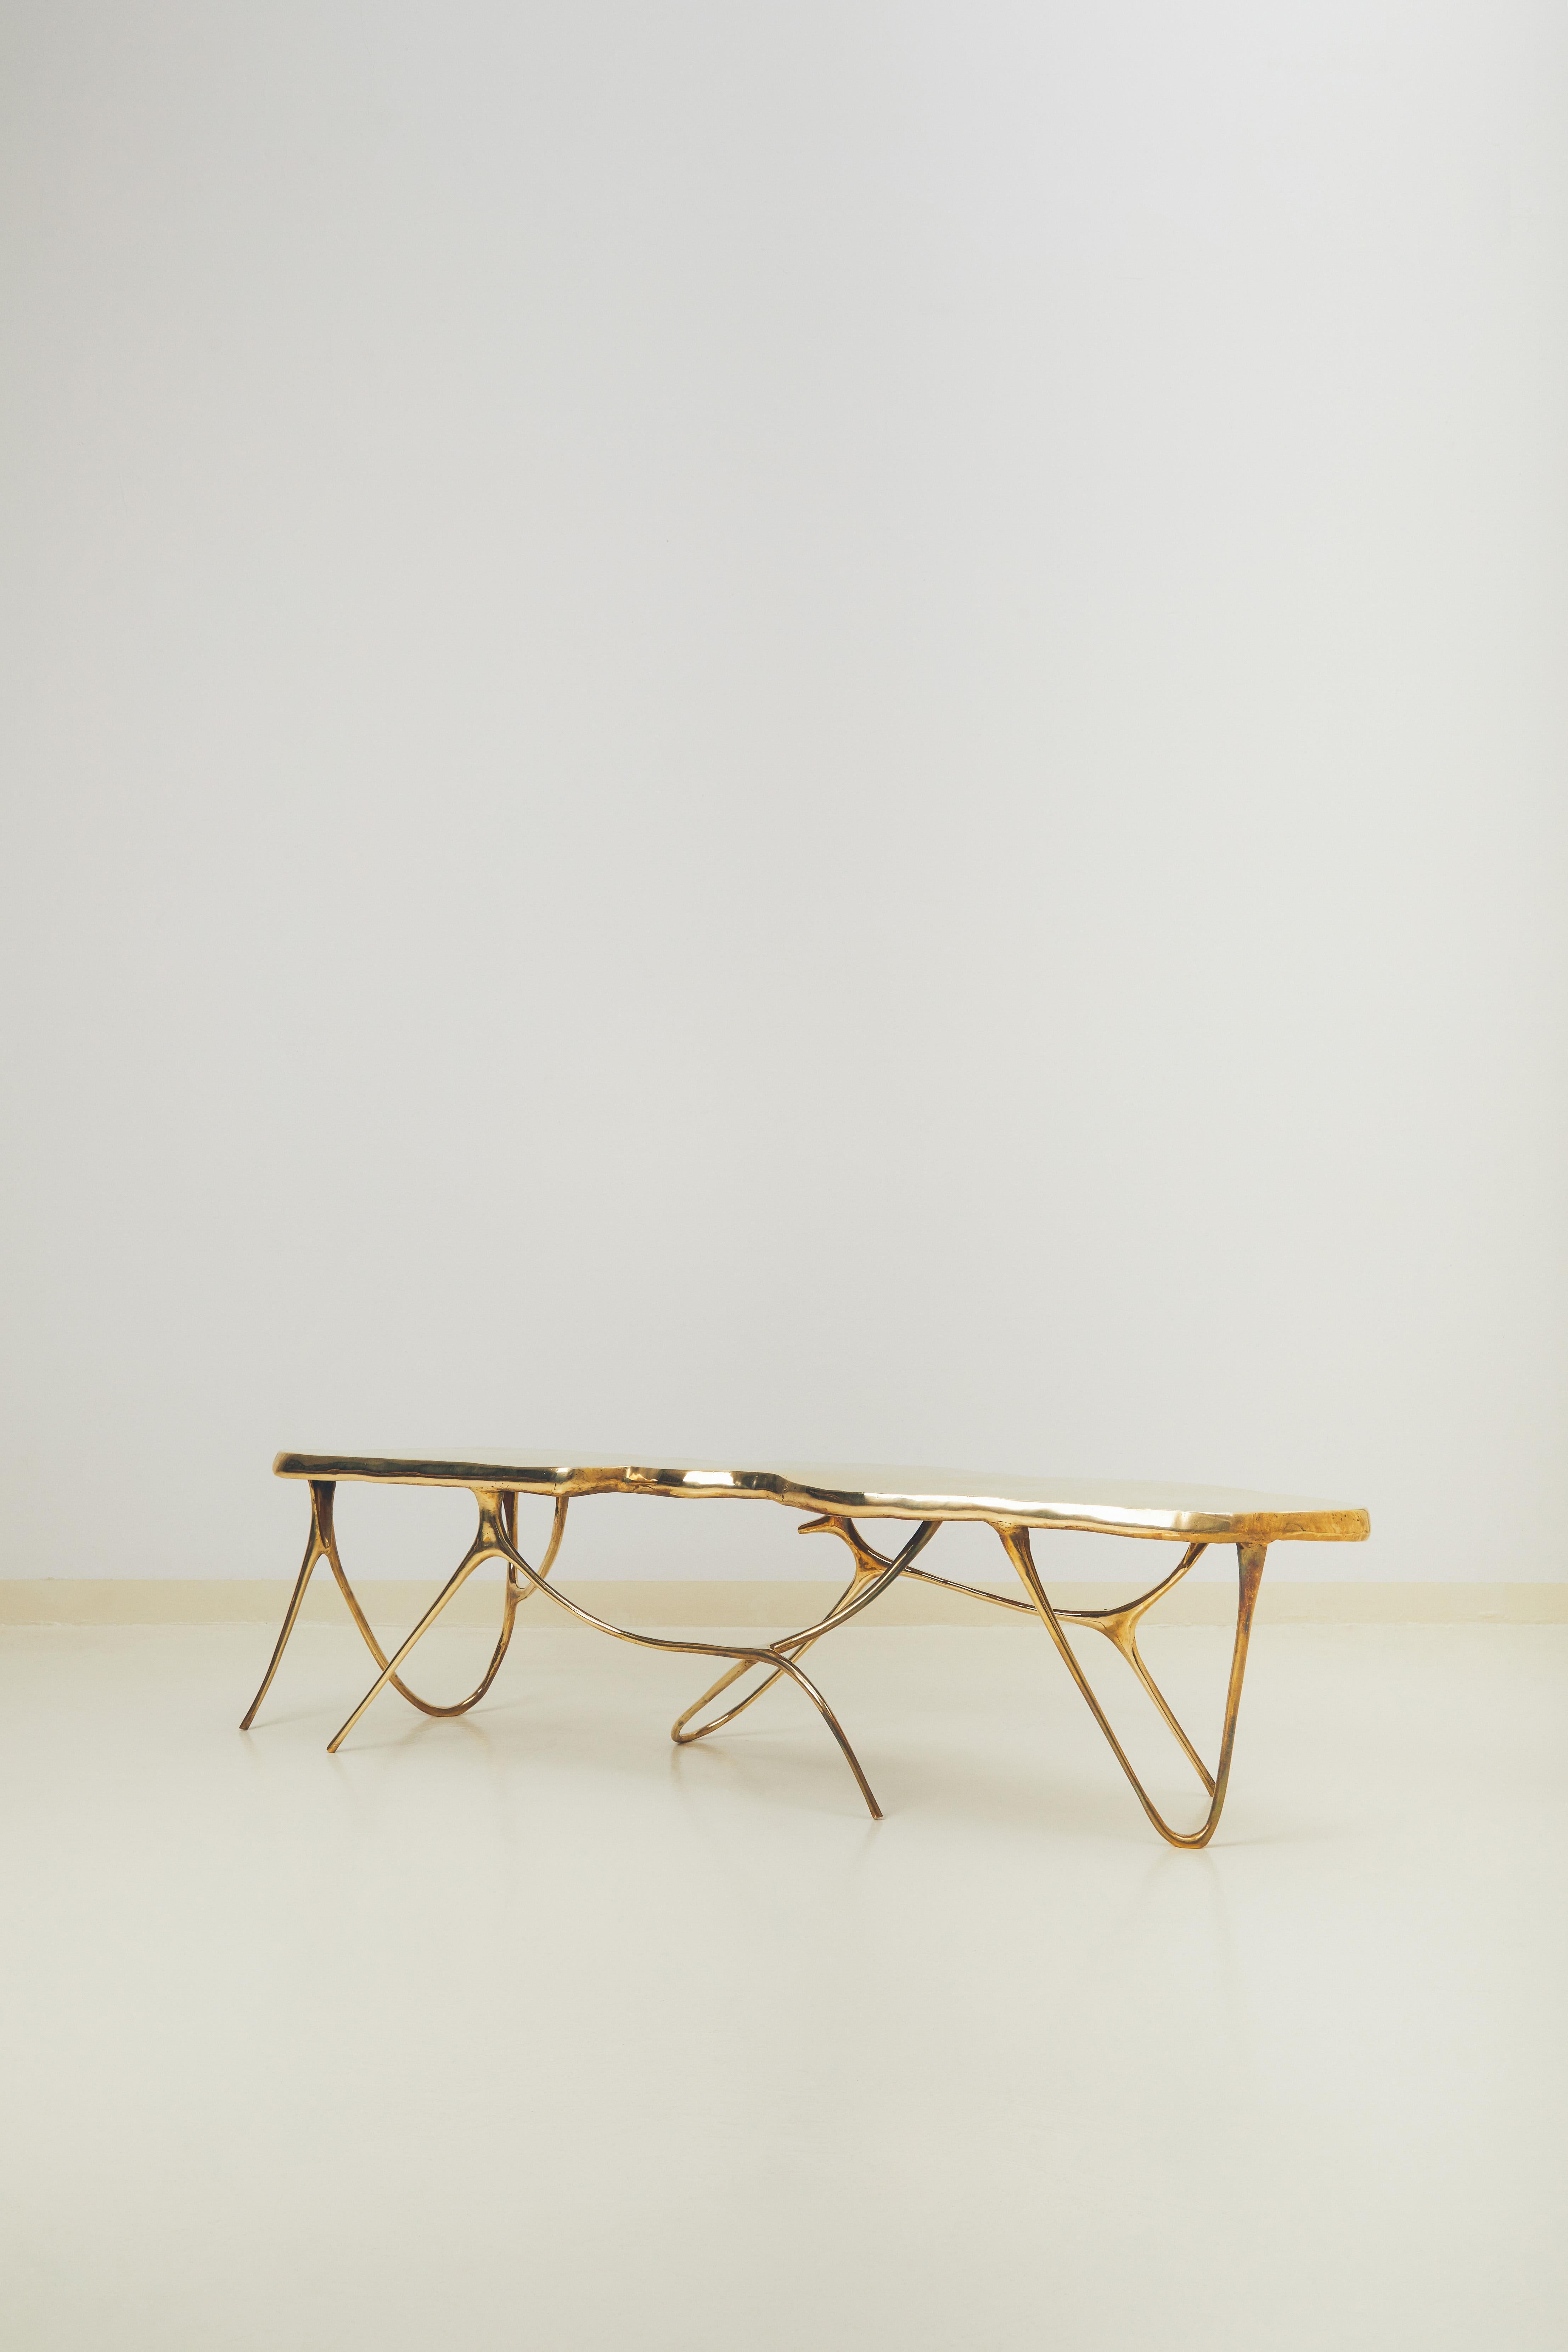 Calligraphic sculpted brass bench by Misaya
Dimensions: W 158 x L 38 x H 40 cm
Materials: Brass

Hand-sculpted brass bench.

Misaya emulates Chinese ink paintings through the process of lost-wax casting.

Each piece in the Ink collection,